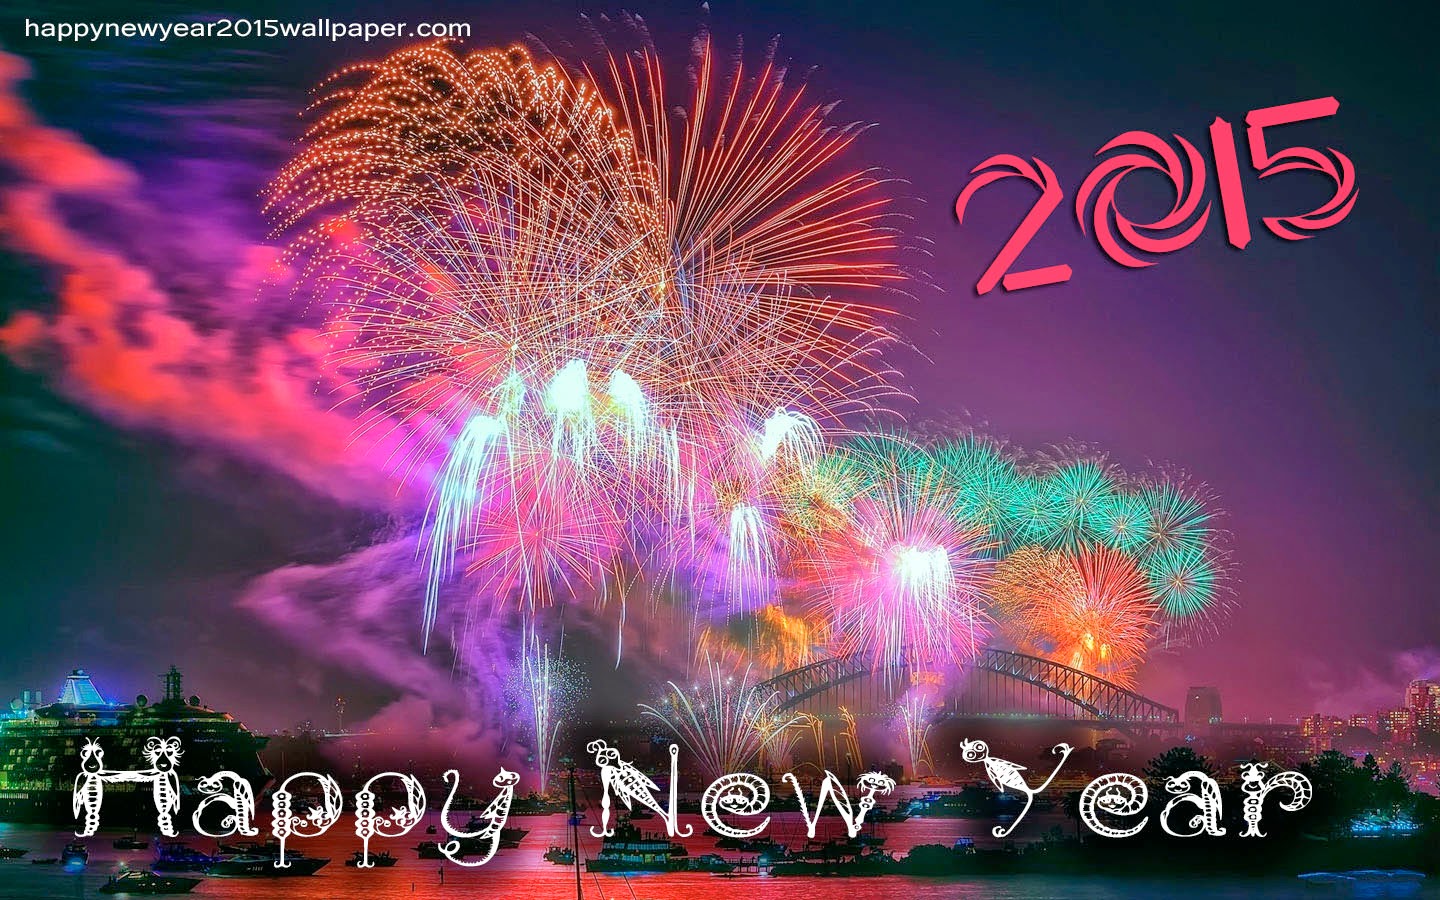 20 Happy New Year Wallpapers 1440x900